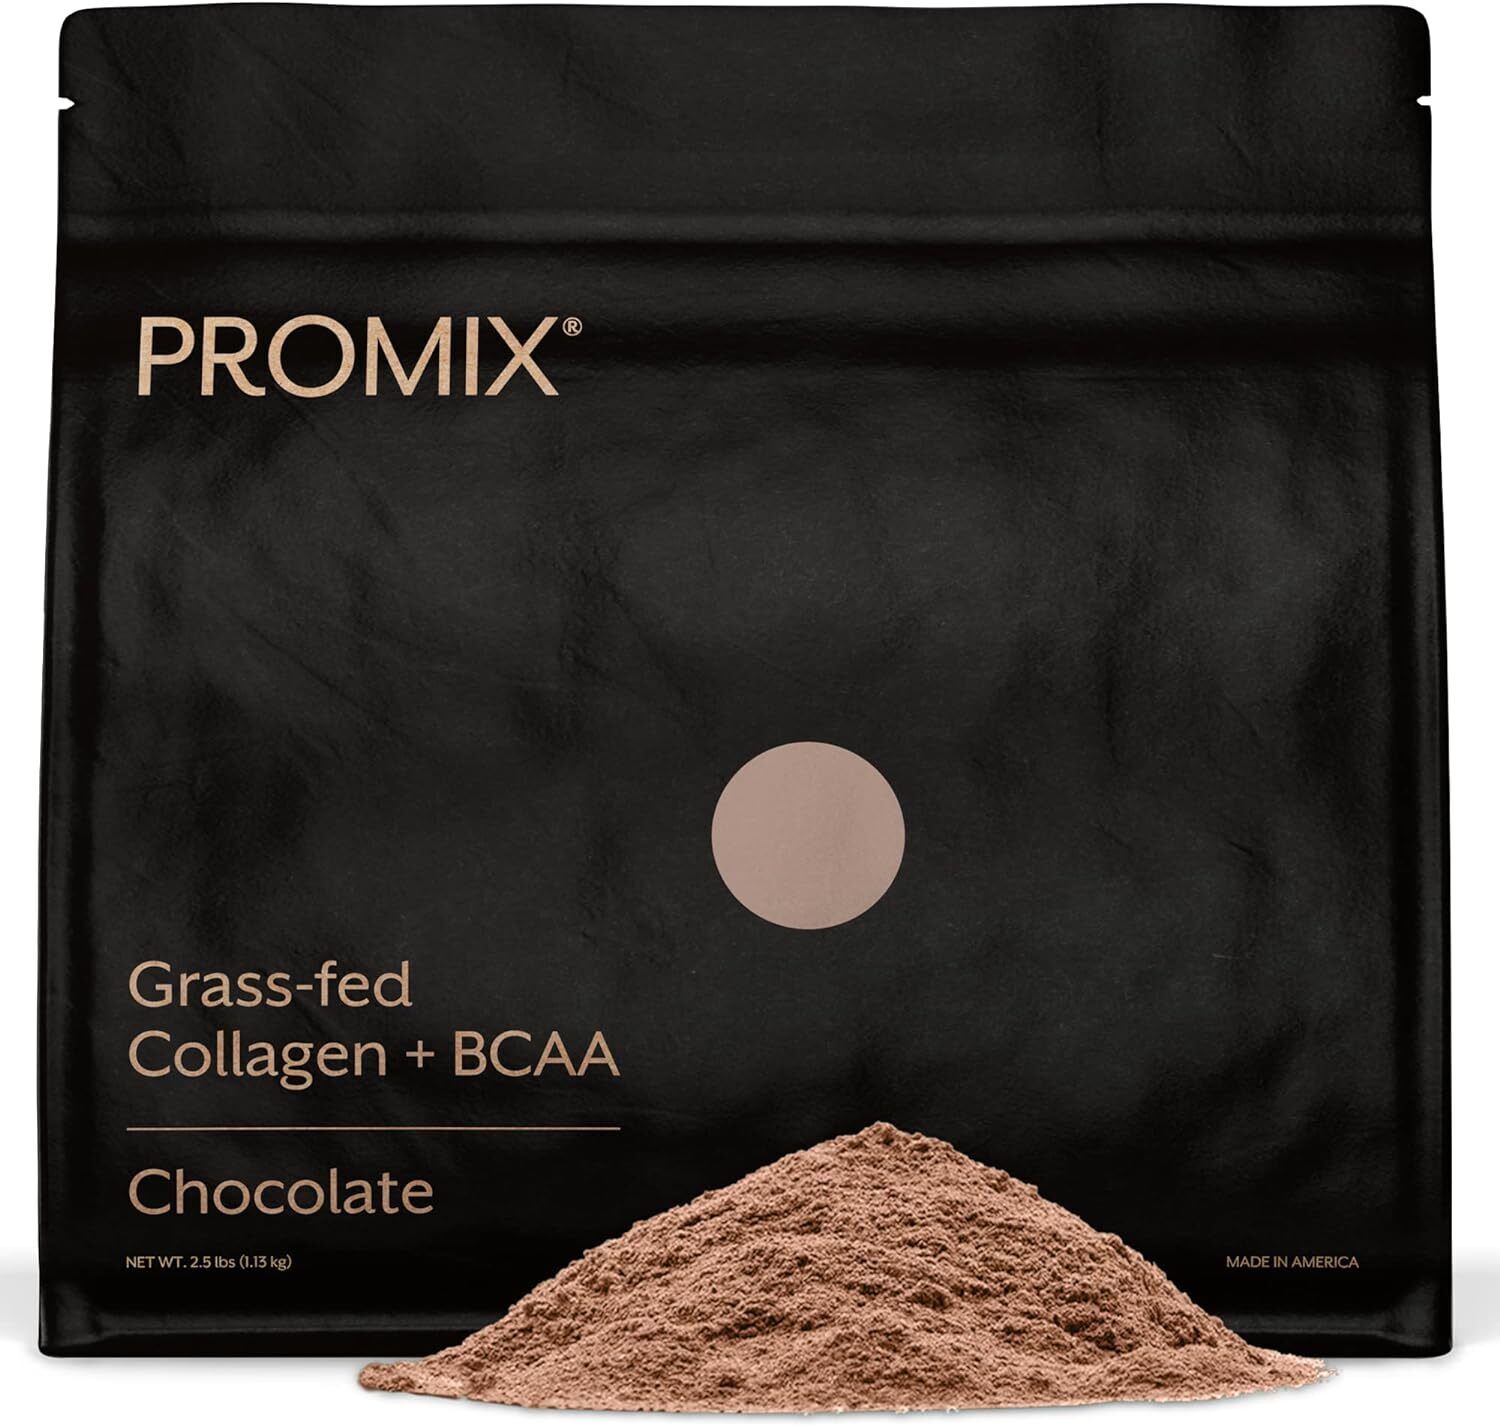 Collagen Peptides and BCAA, Hydrolyzed Collagen Protein Promotes Healthy Skin